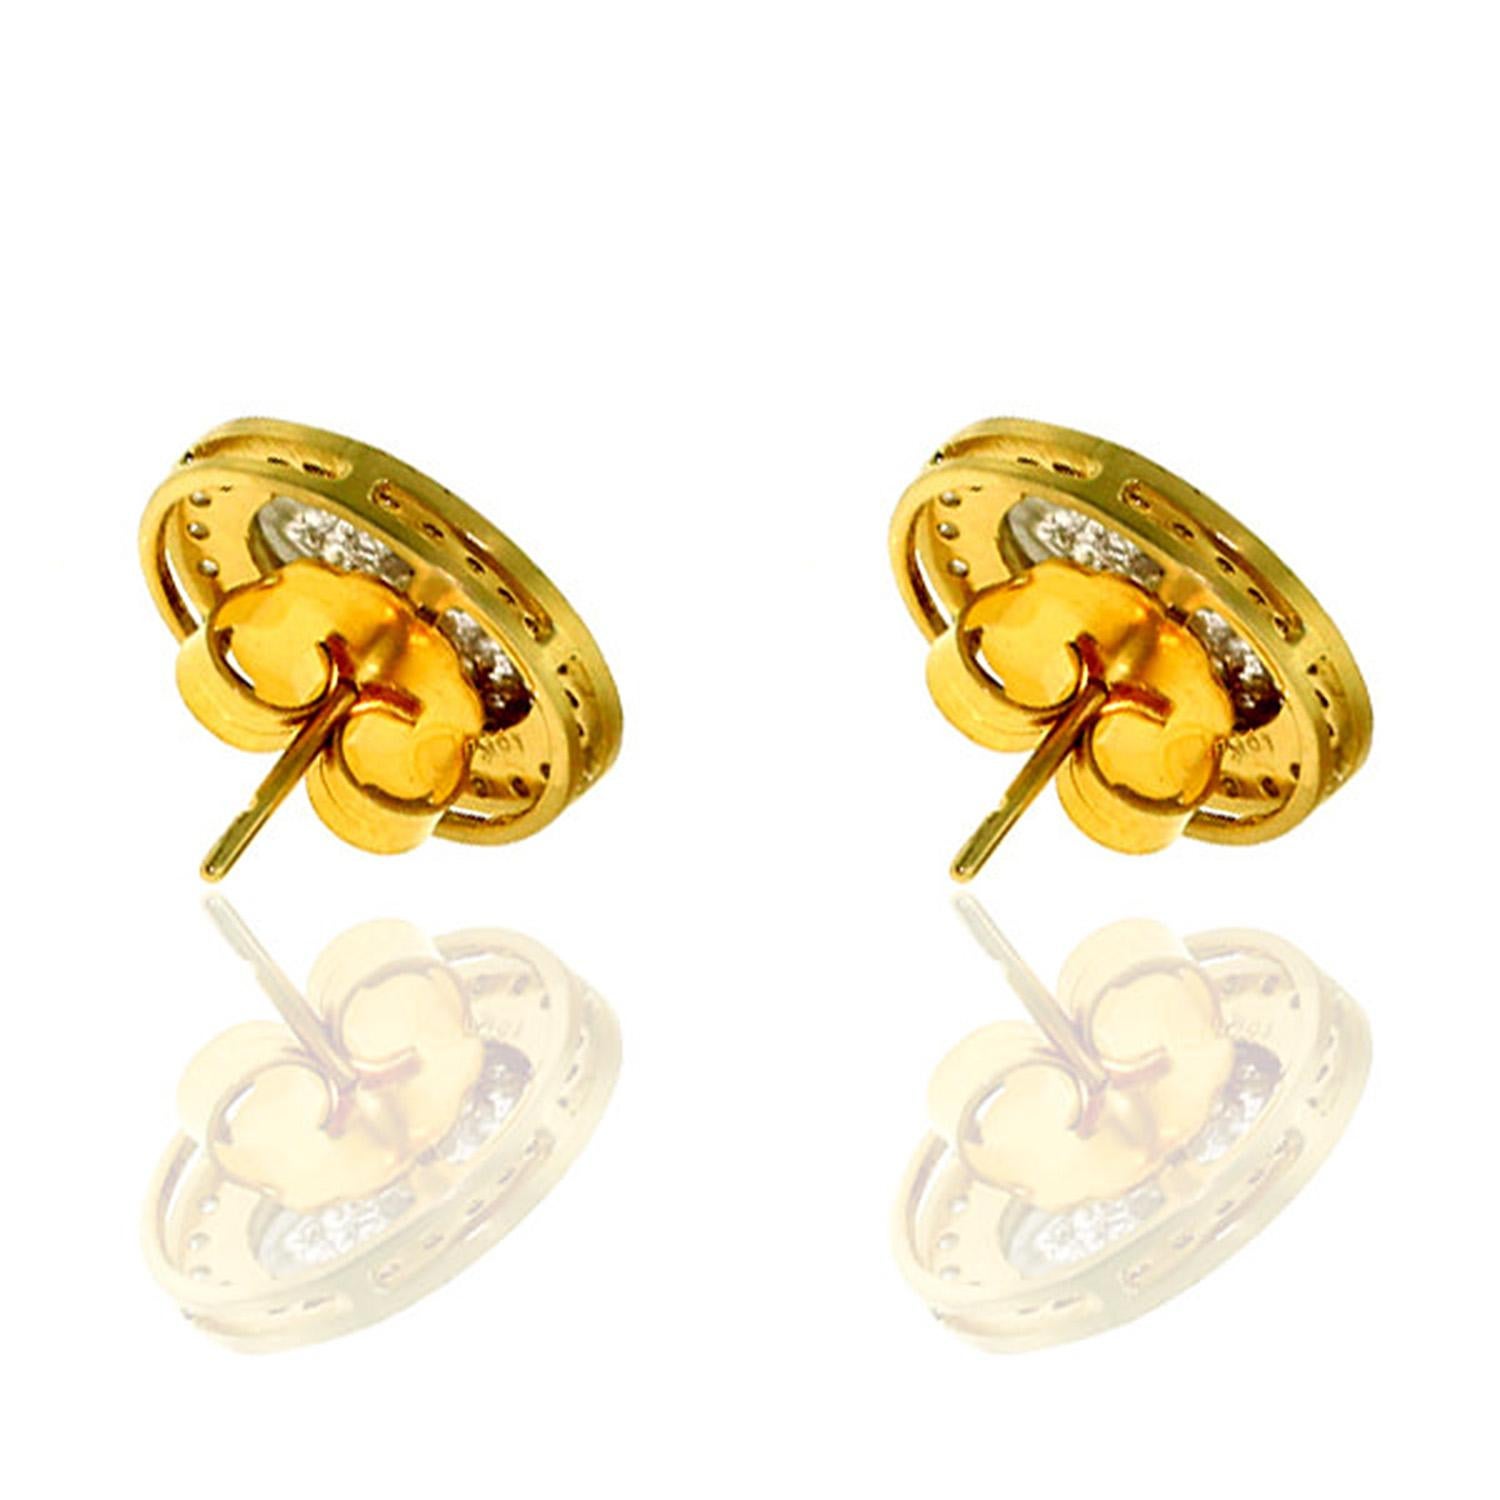 These stud earrings features a fancy natural slice diamond in center and surrounded with sparkling diamonds.  It is set in 18-karat gold and 2.26 carats diamonds. 

FOLLOW  MEGHNA JEWELS storefront to view the latest collection & exclusive pieces. 